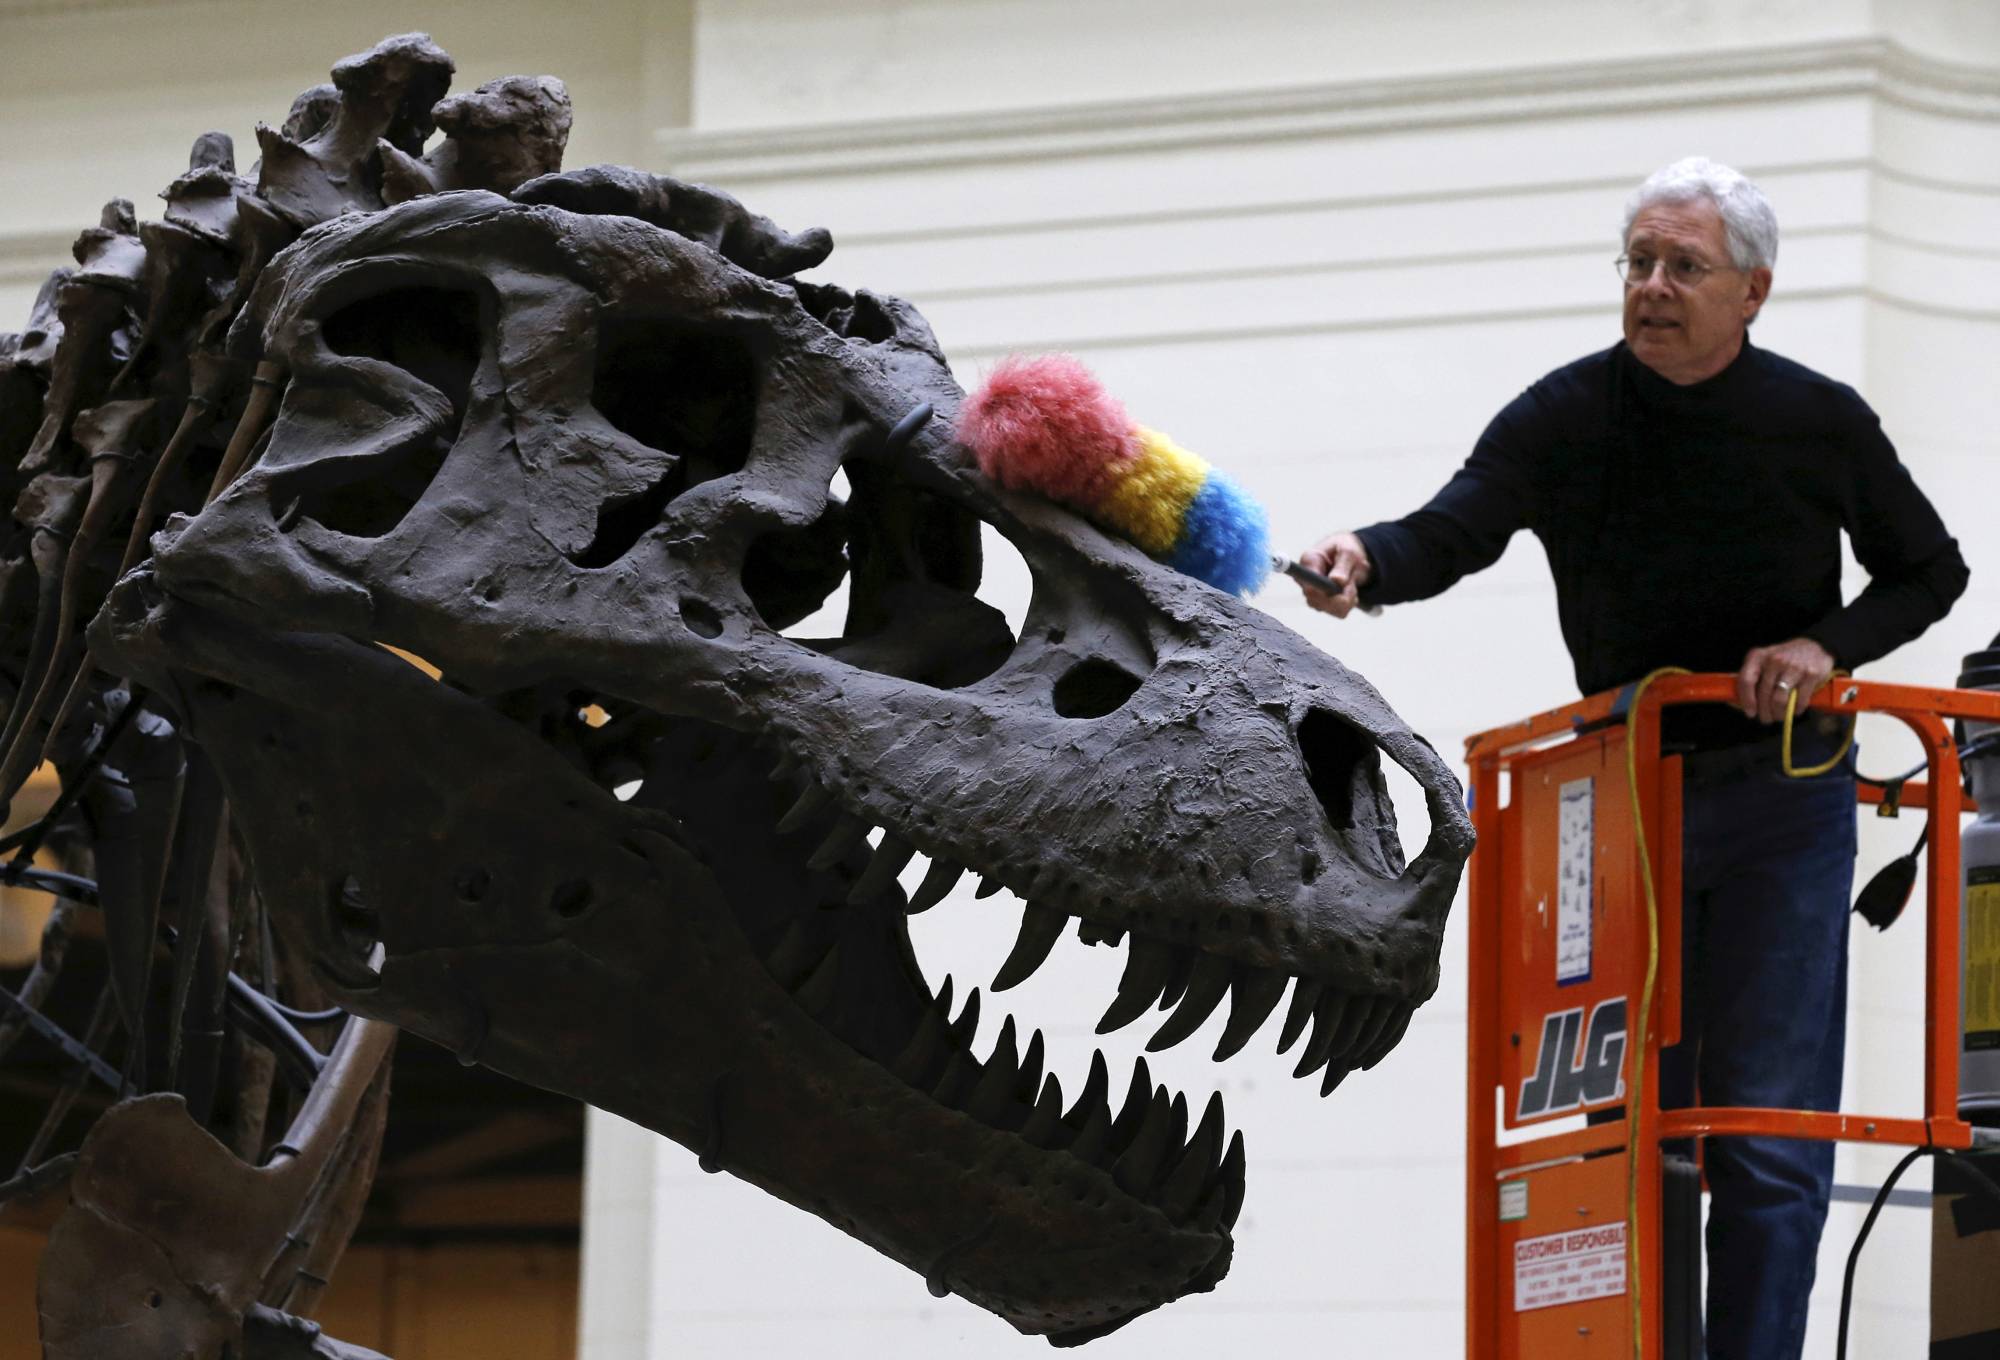 Like Godzilla, but actually real': study shows T. rex numbered 2.5